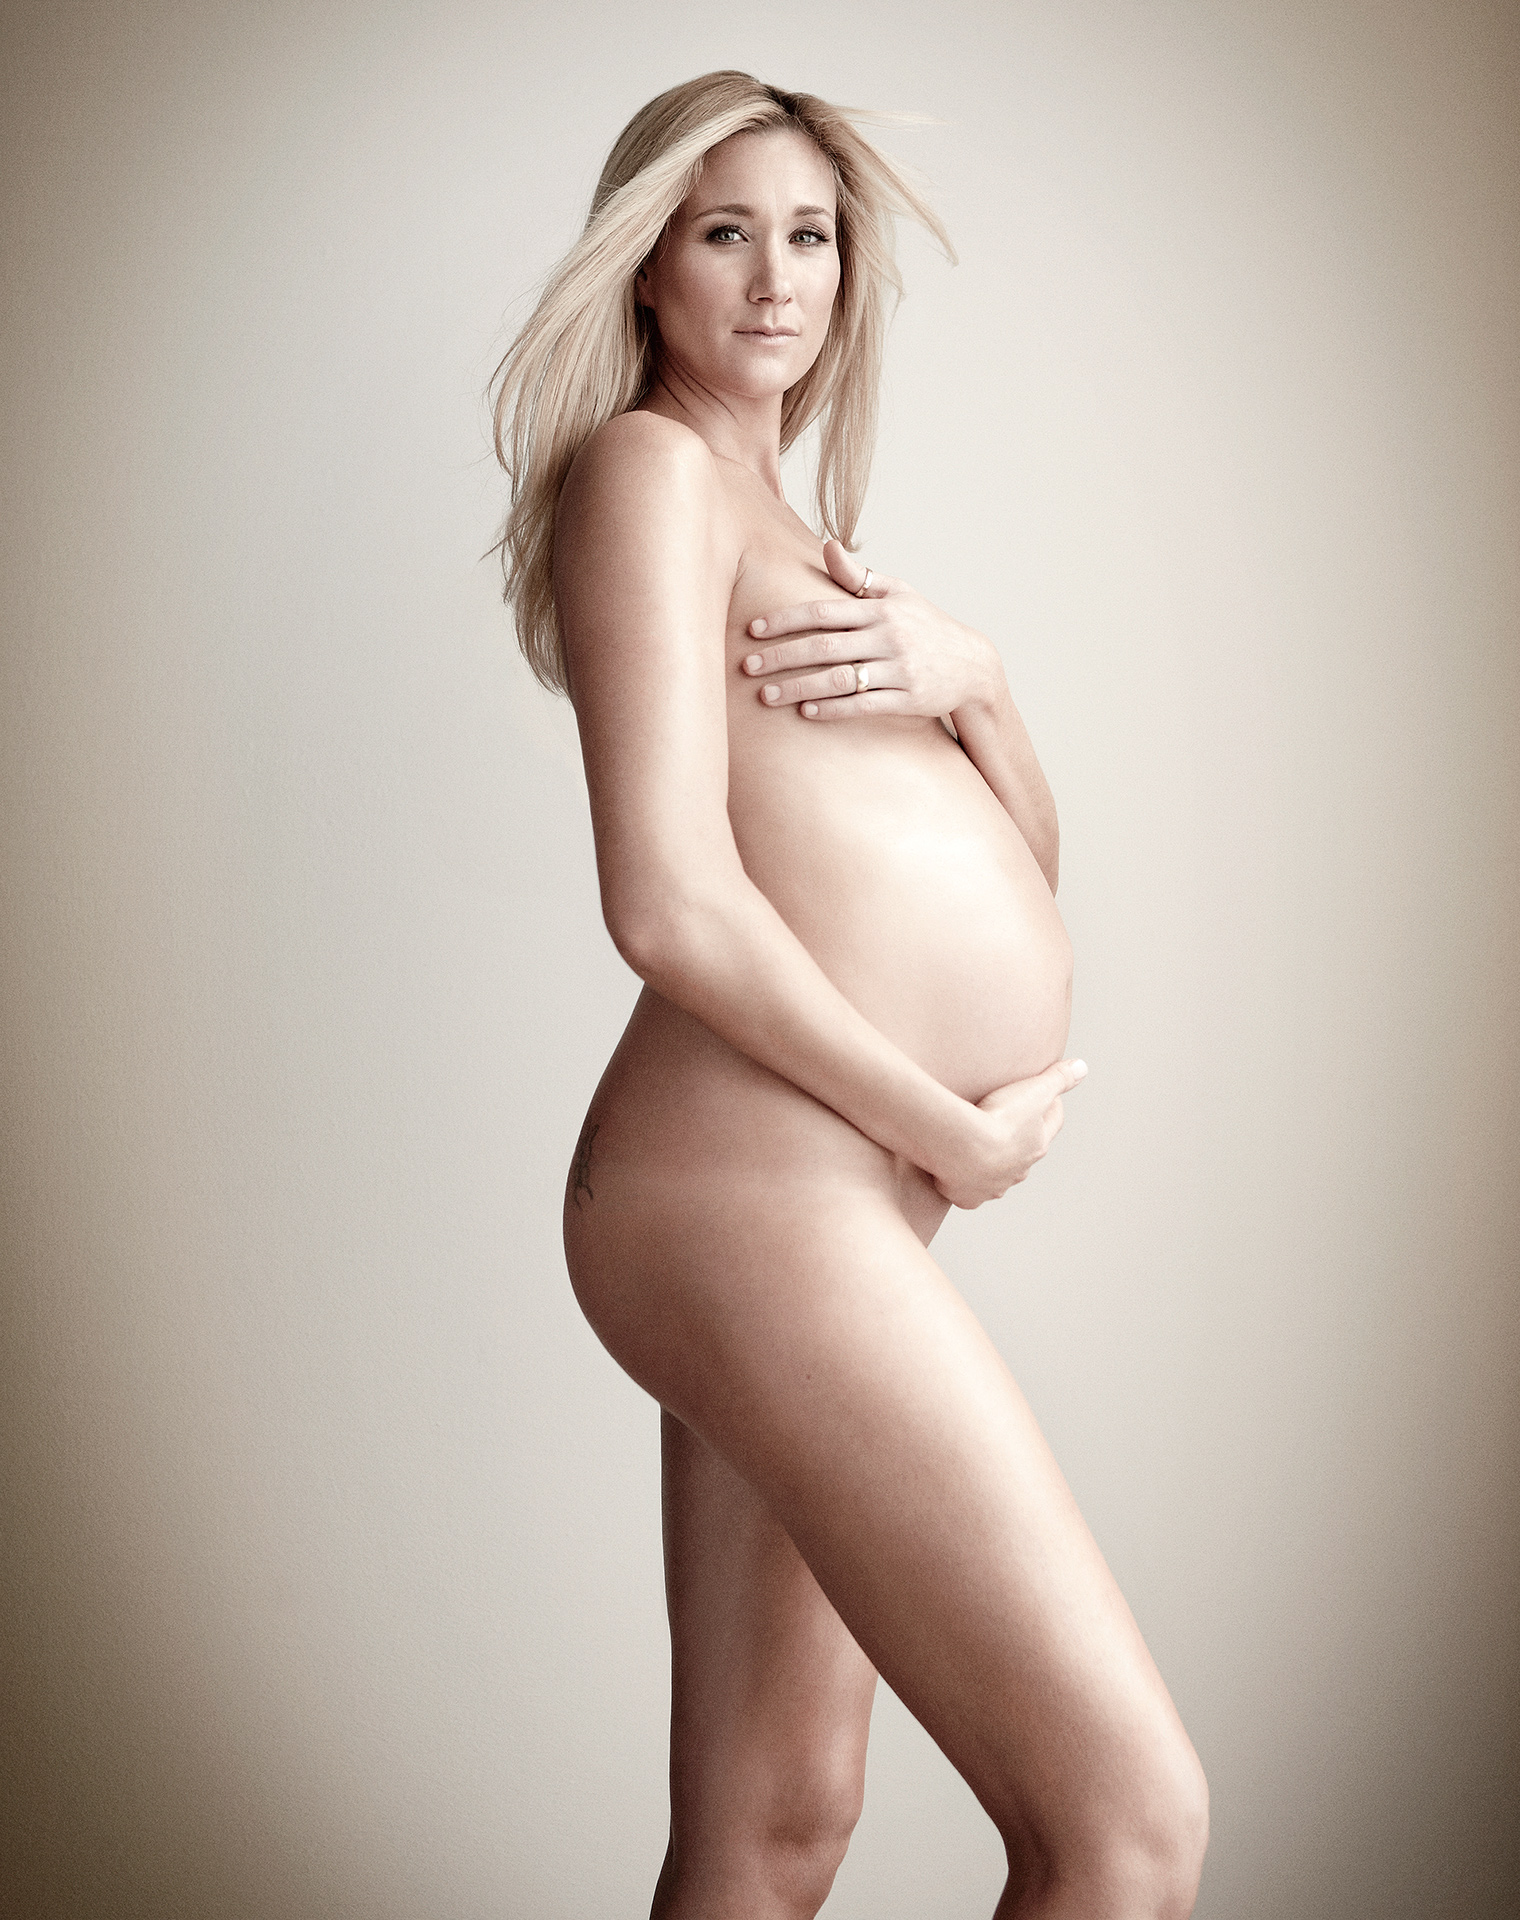 Kerri Walsh Jennings - 2013 Body Issue's Bodies We Want - ESPN The Mag...